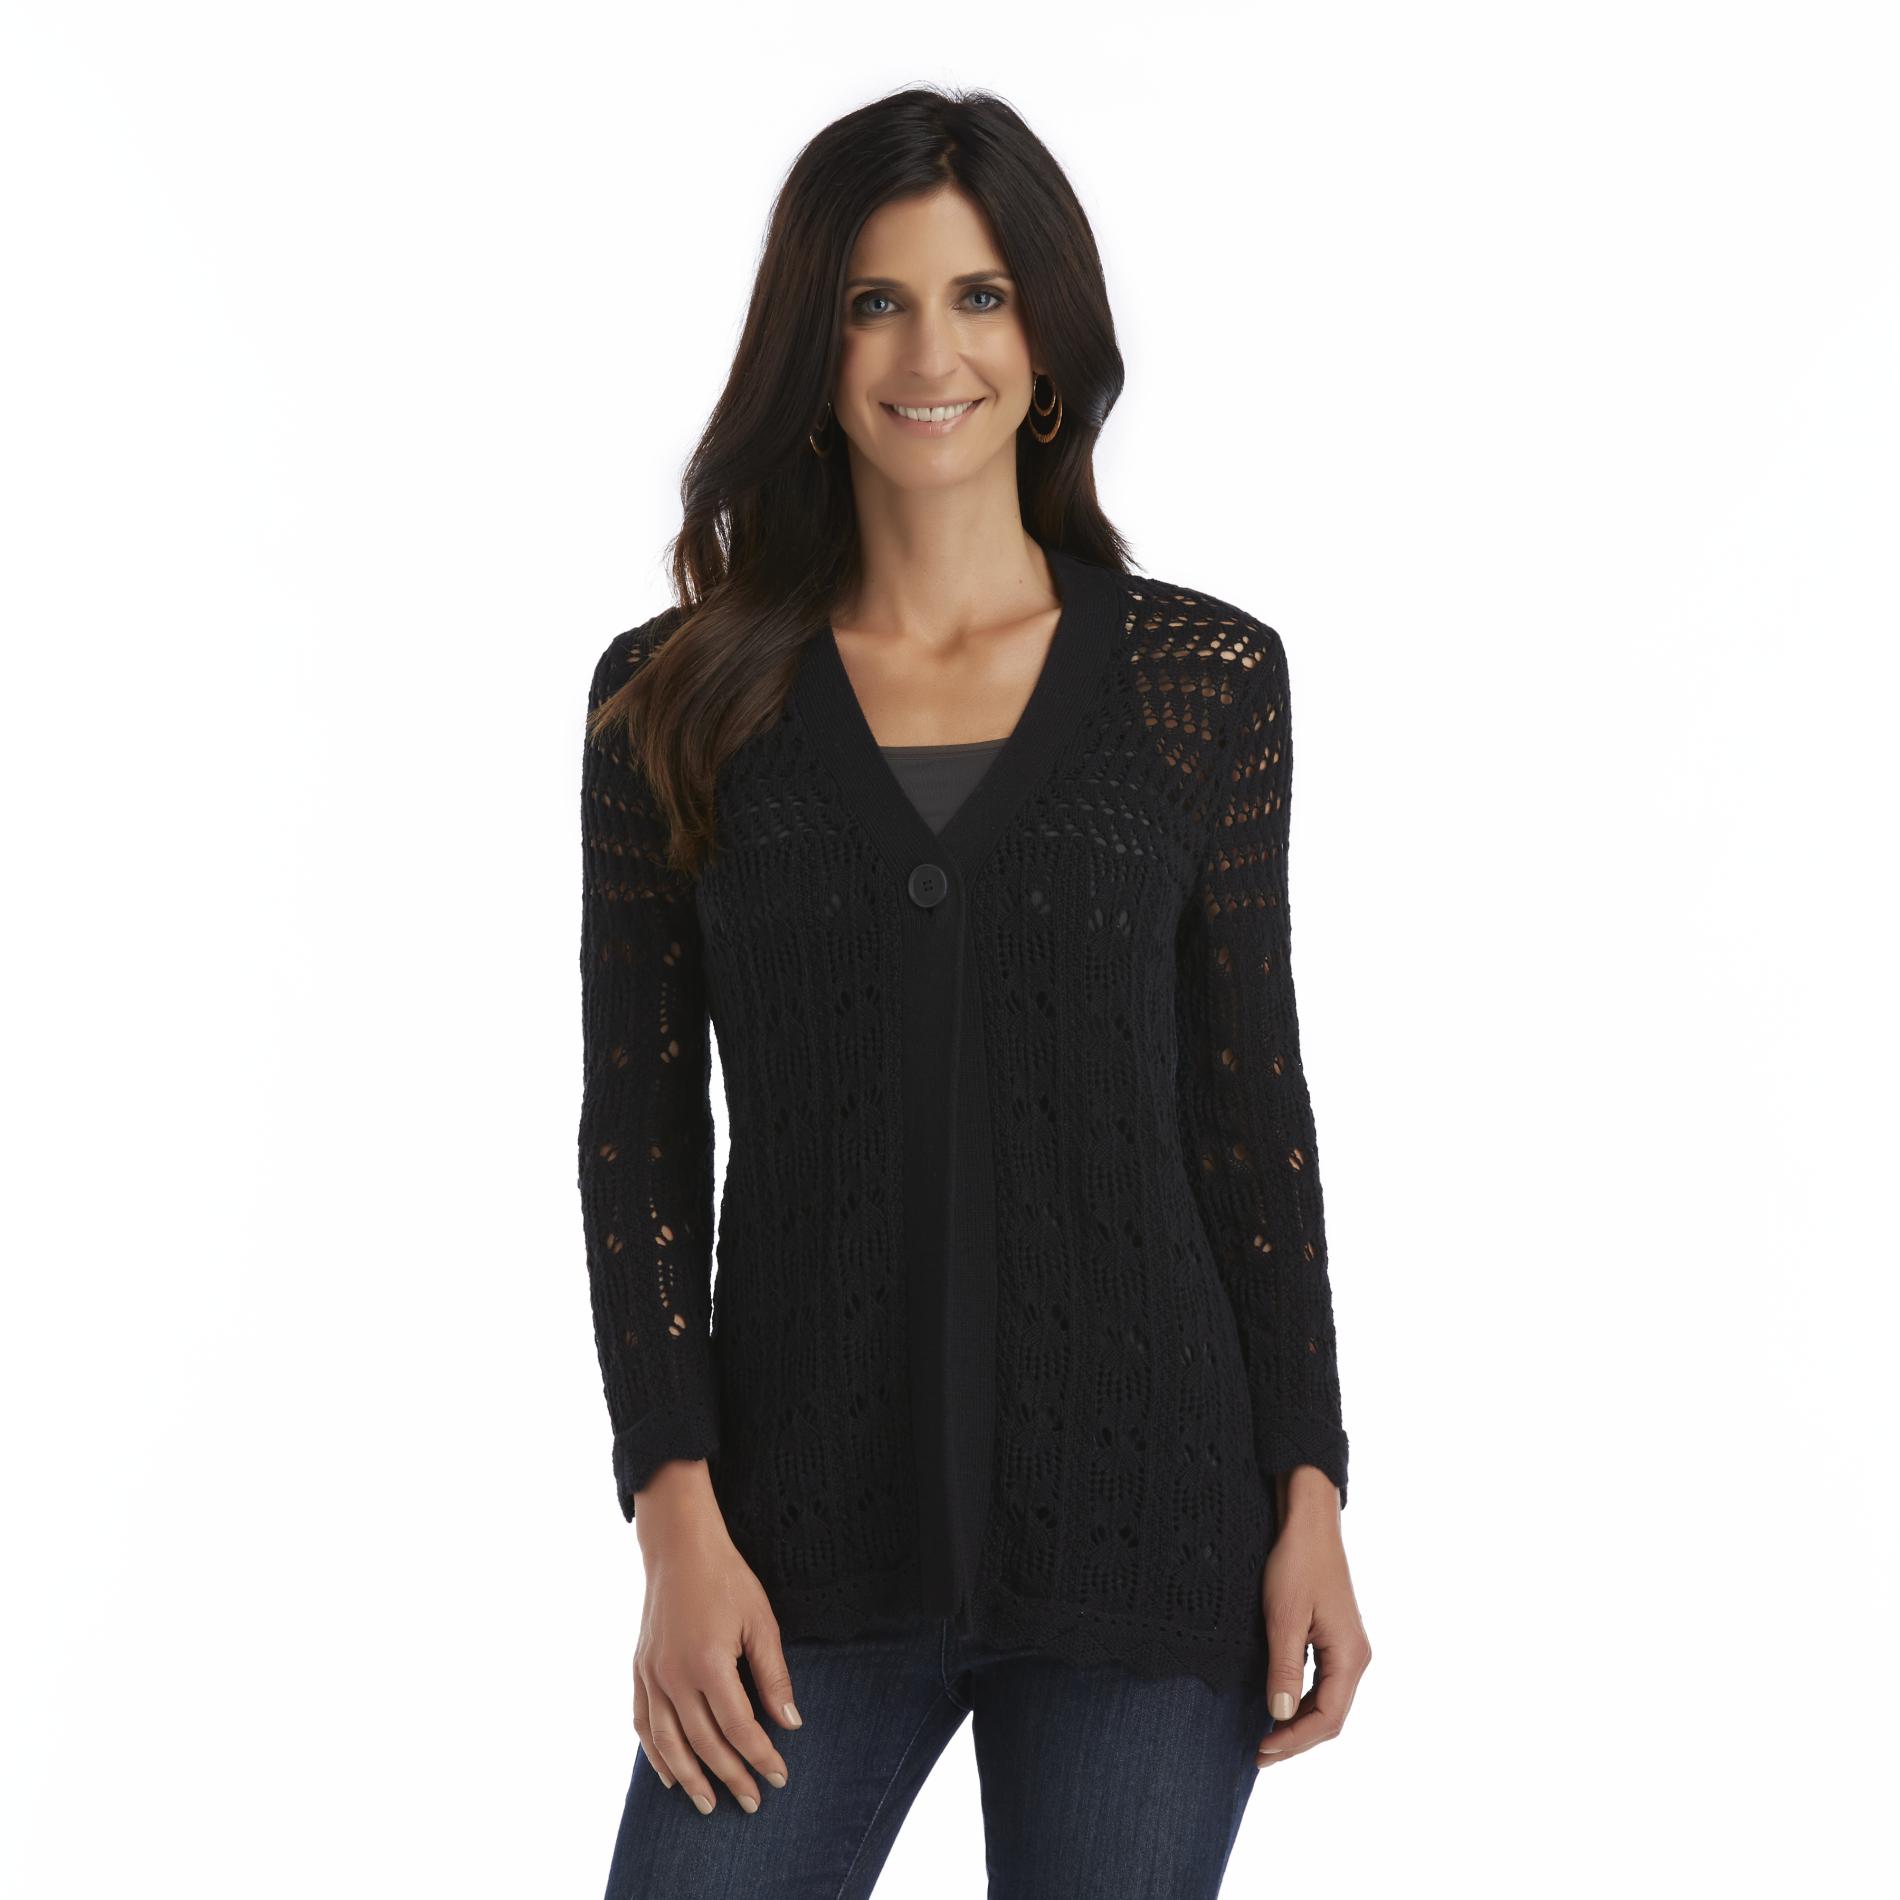 Basic Editions Women's Open Lace Cardigan Sweater